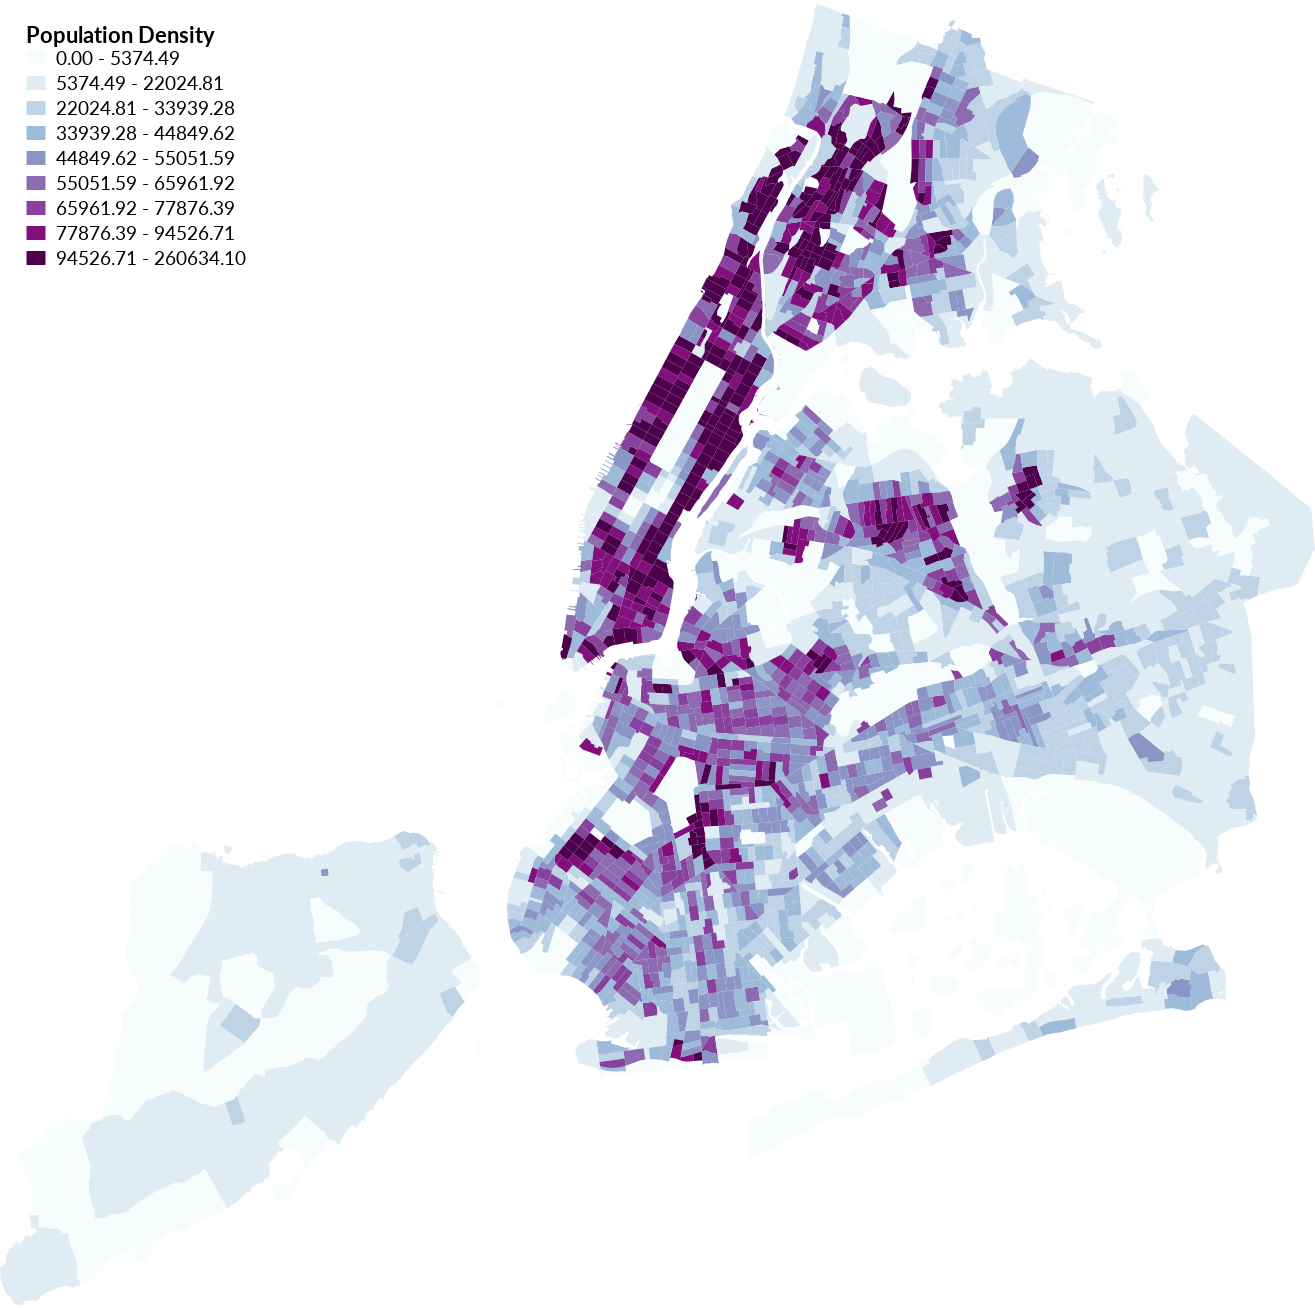 Population density choropleth with sequential colors